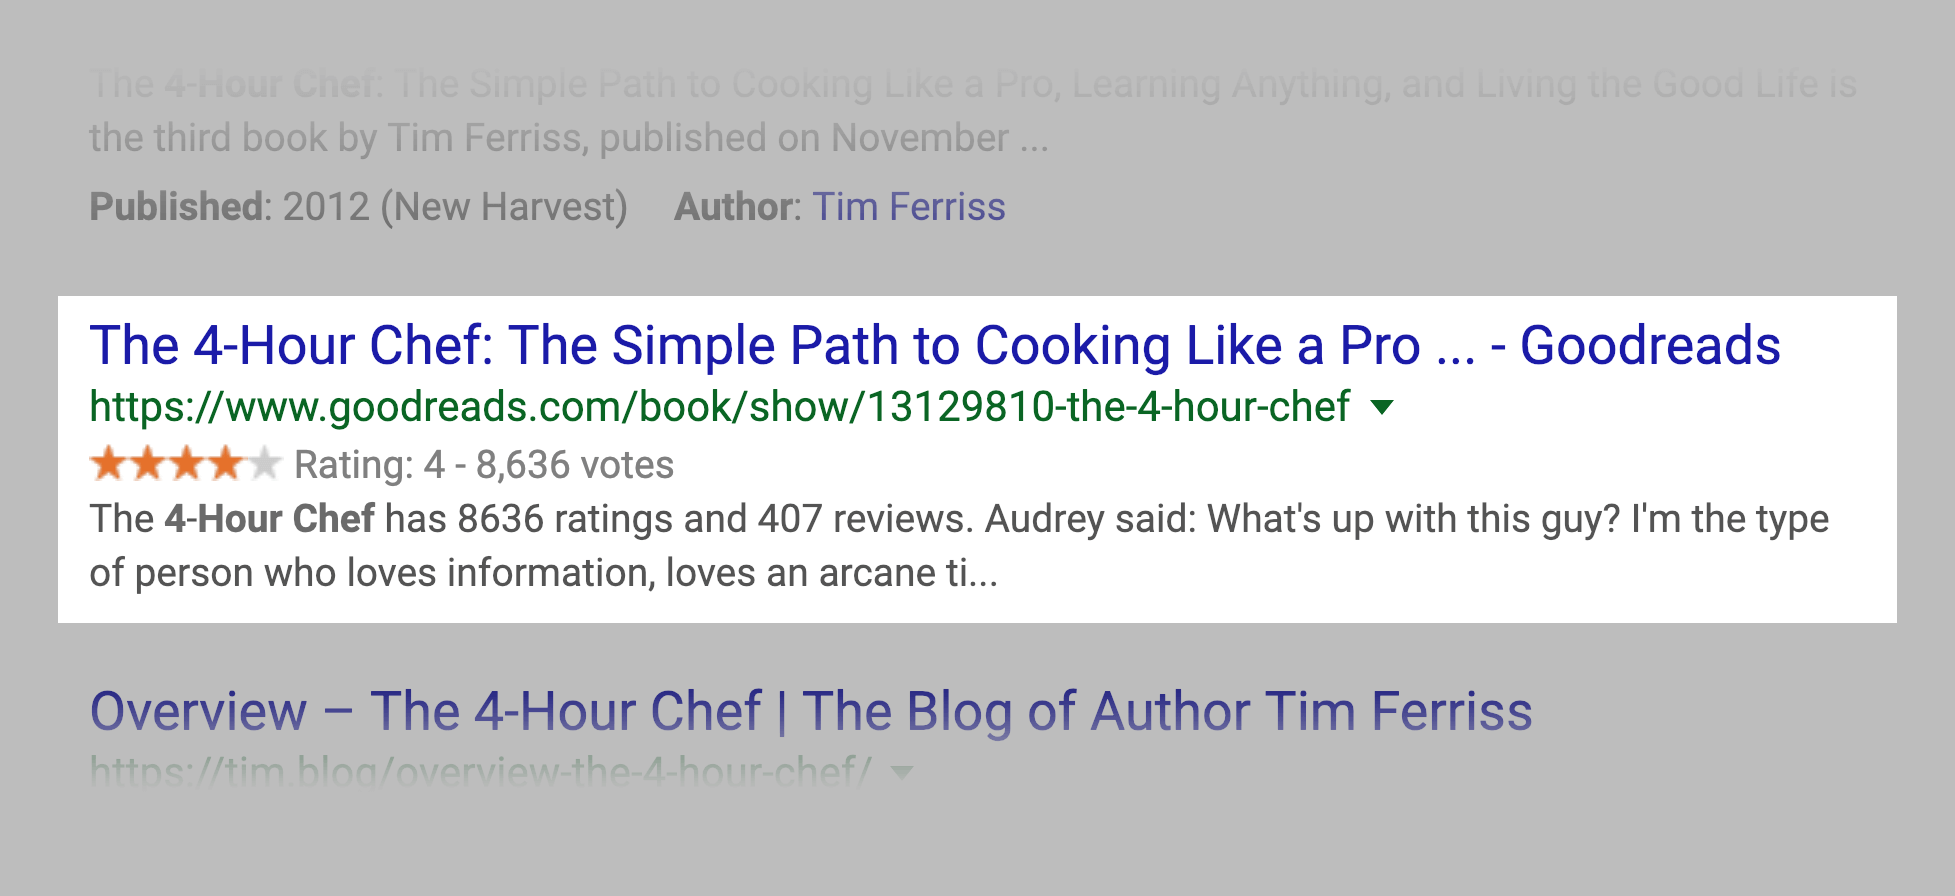 featured-snippet-sample